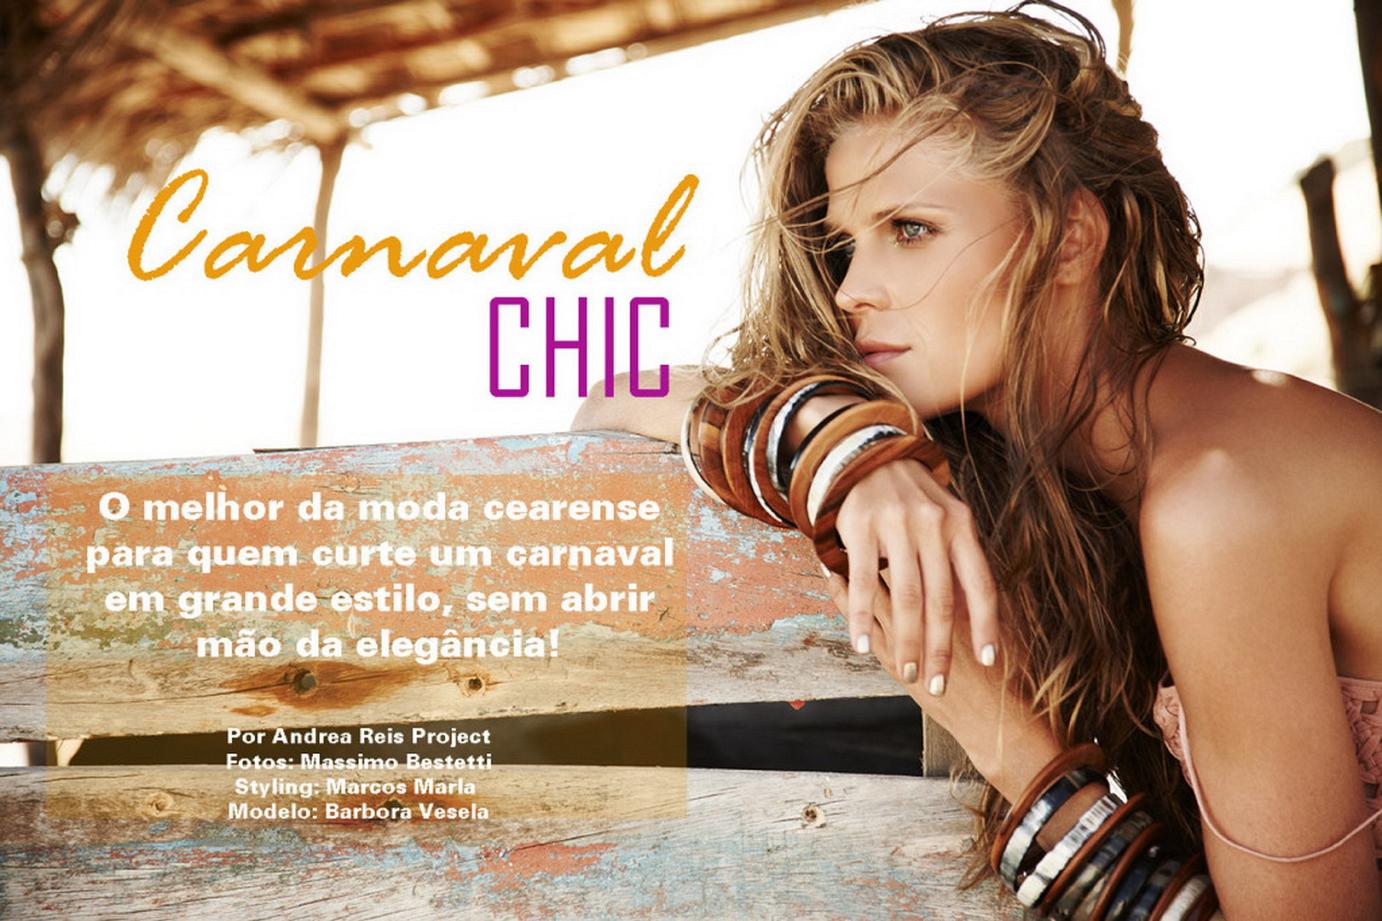 CoqCreative power by ProductionLink s.r.l. Carnaval-Chic Carnaval-Chic  Carnaval-Chic